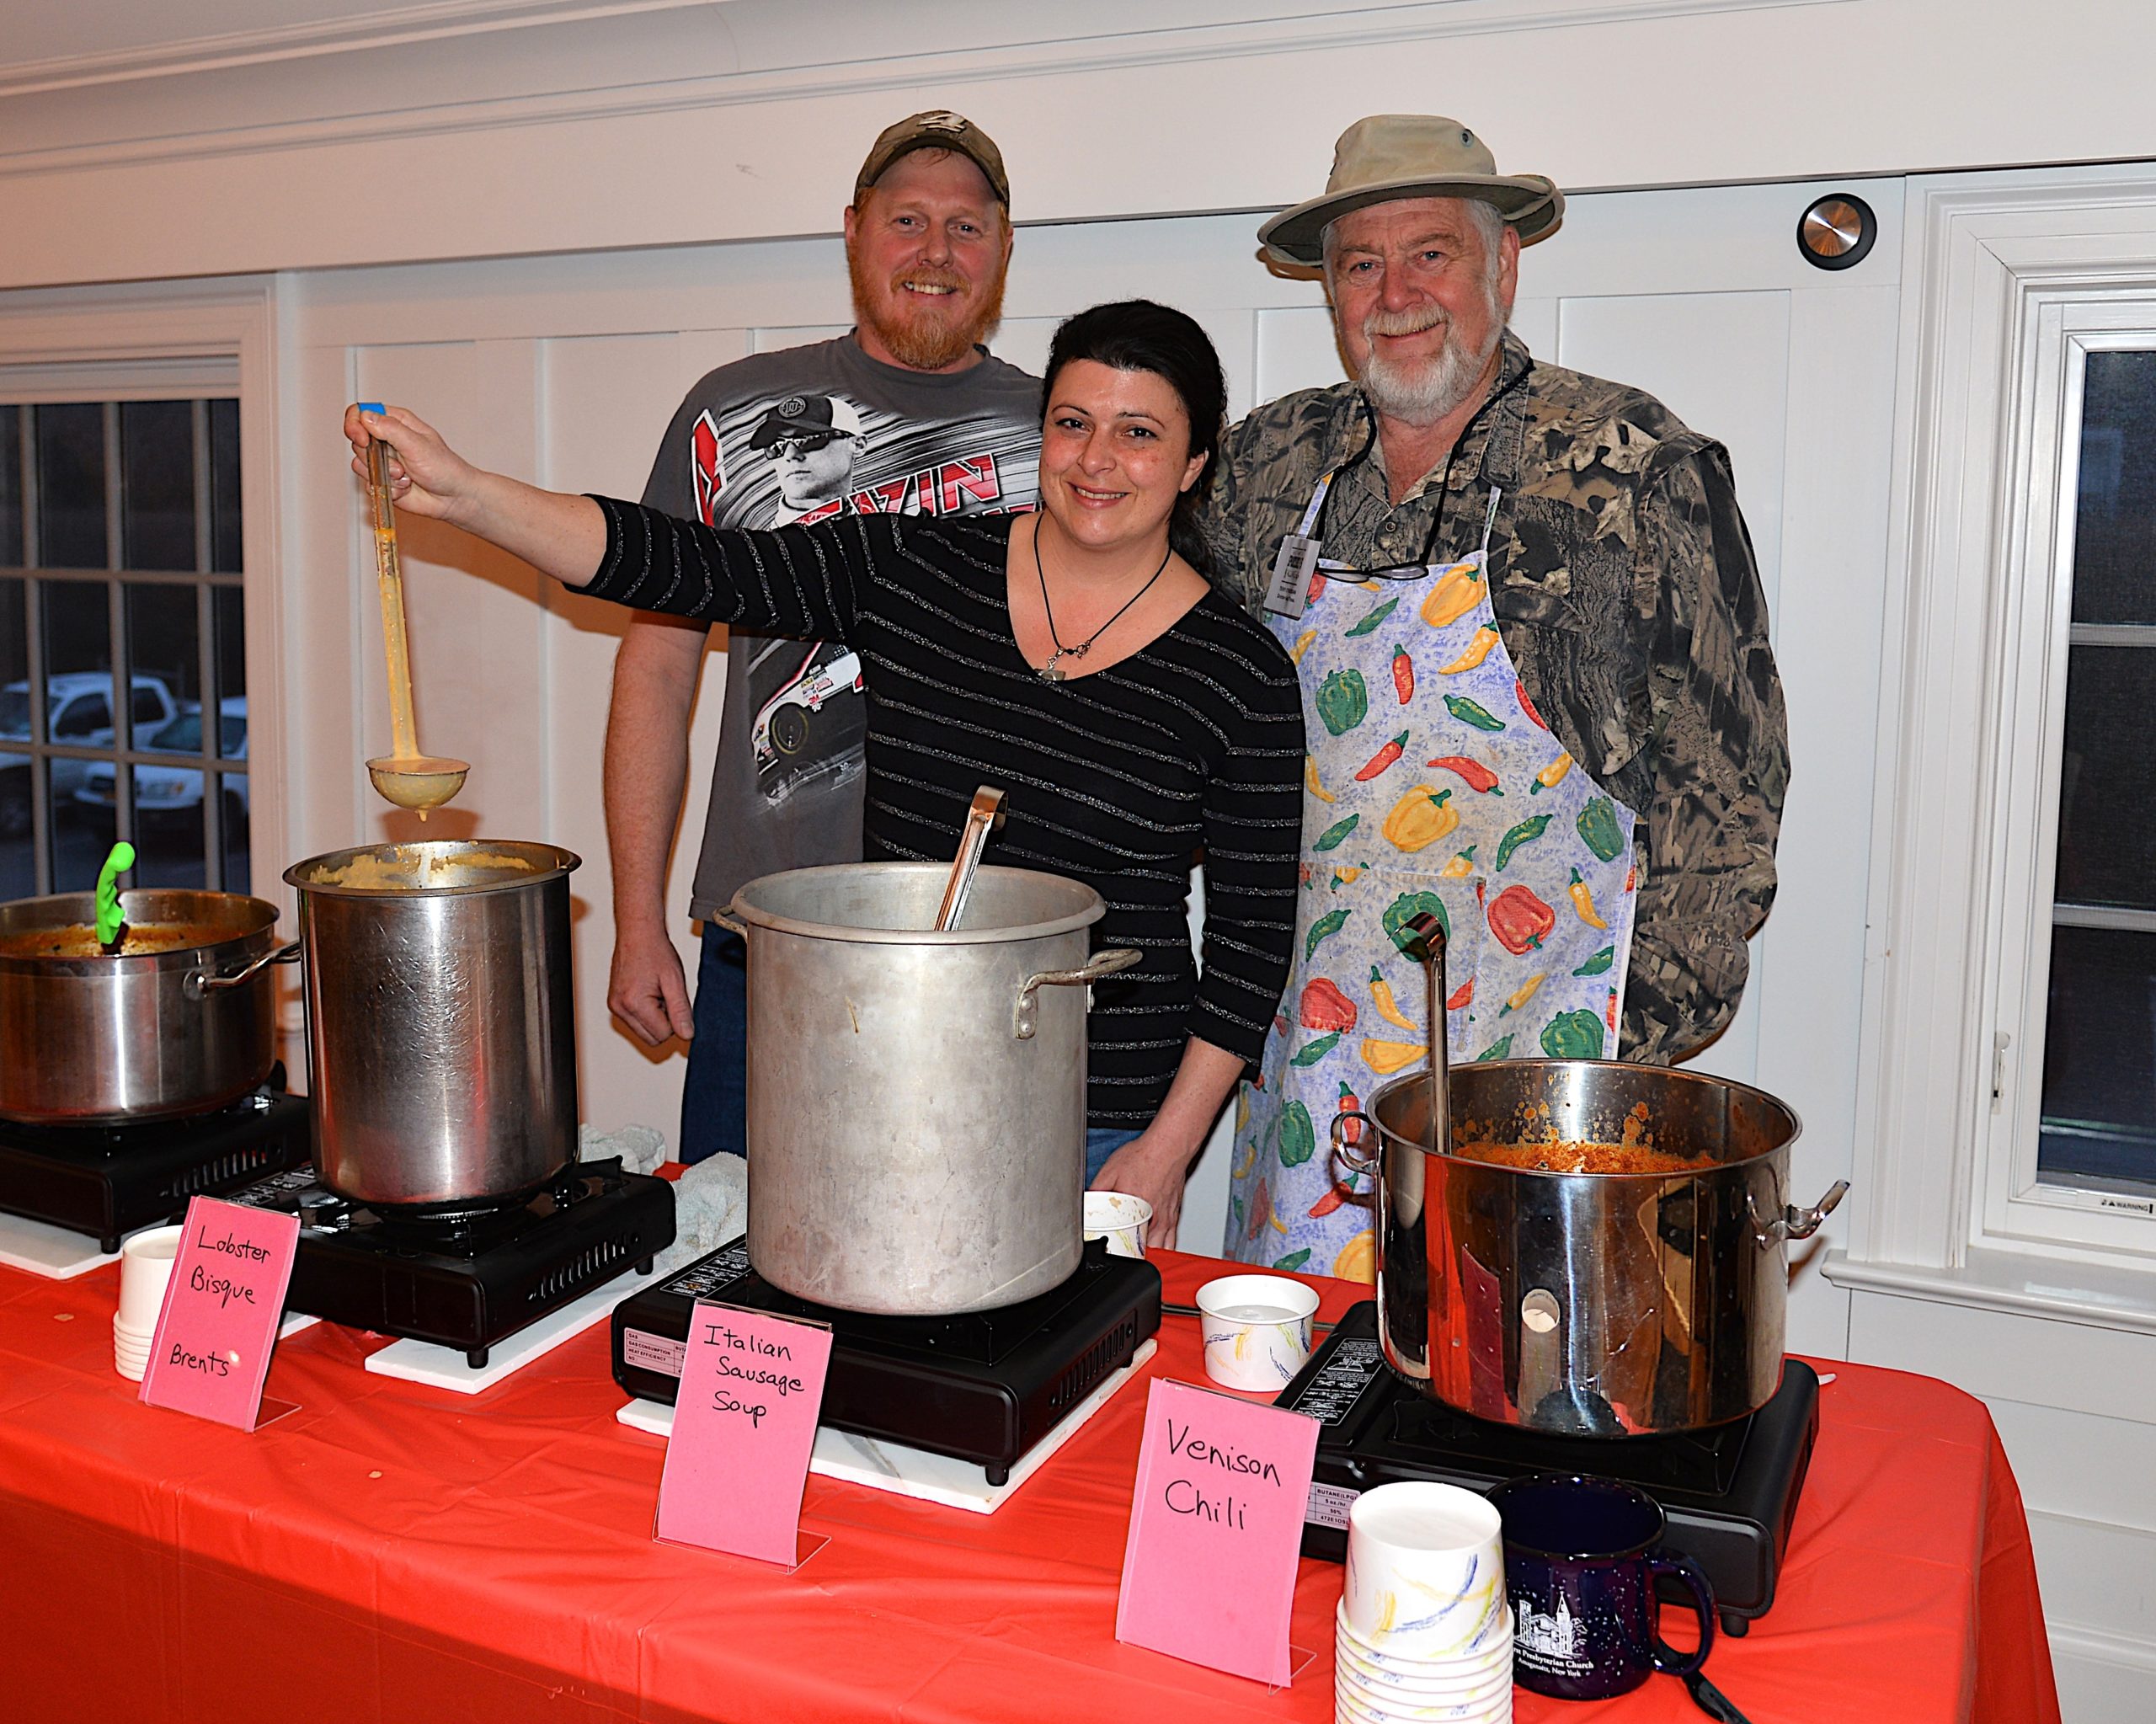 Mark and Diane Hallock, and Terry O’Riordan ready to serve at the Amagansett Presbyterian Church's Soup and Chili dinner on Saturday. KYRIL BROMLEY 